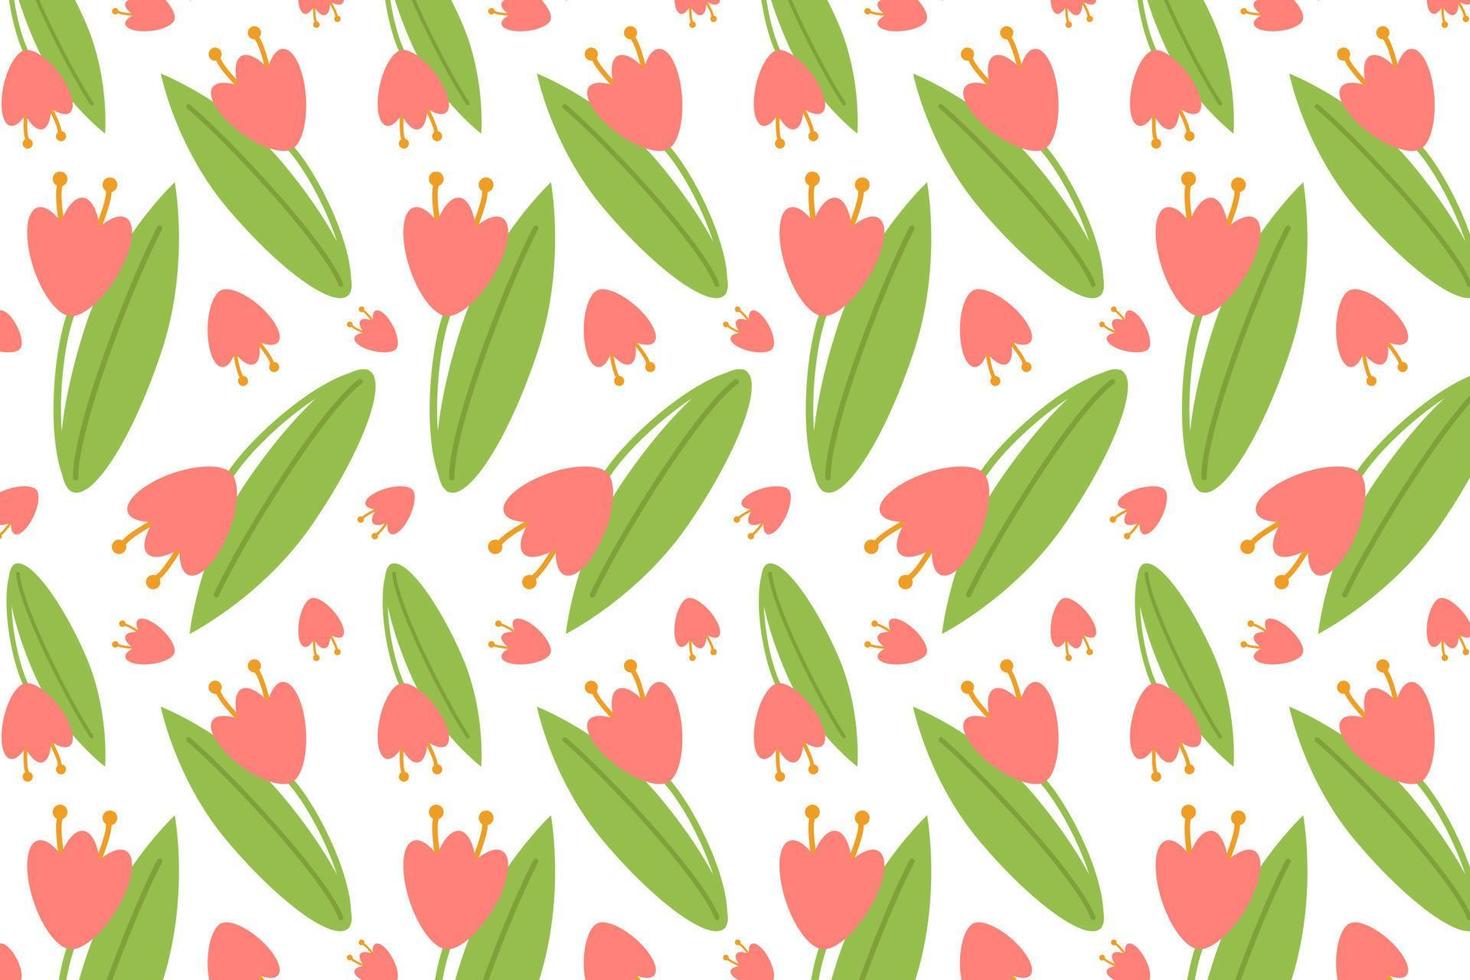 Seamless pattern of red tulips on green stem with leaves isolated on white background. Floral print for posters, cards, clothes, nursery. Decoration of flower shops. Vector illustration. Cartoon style